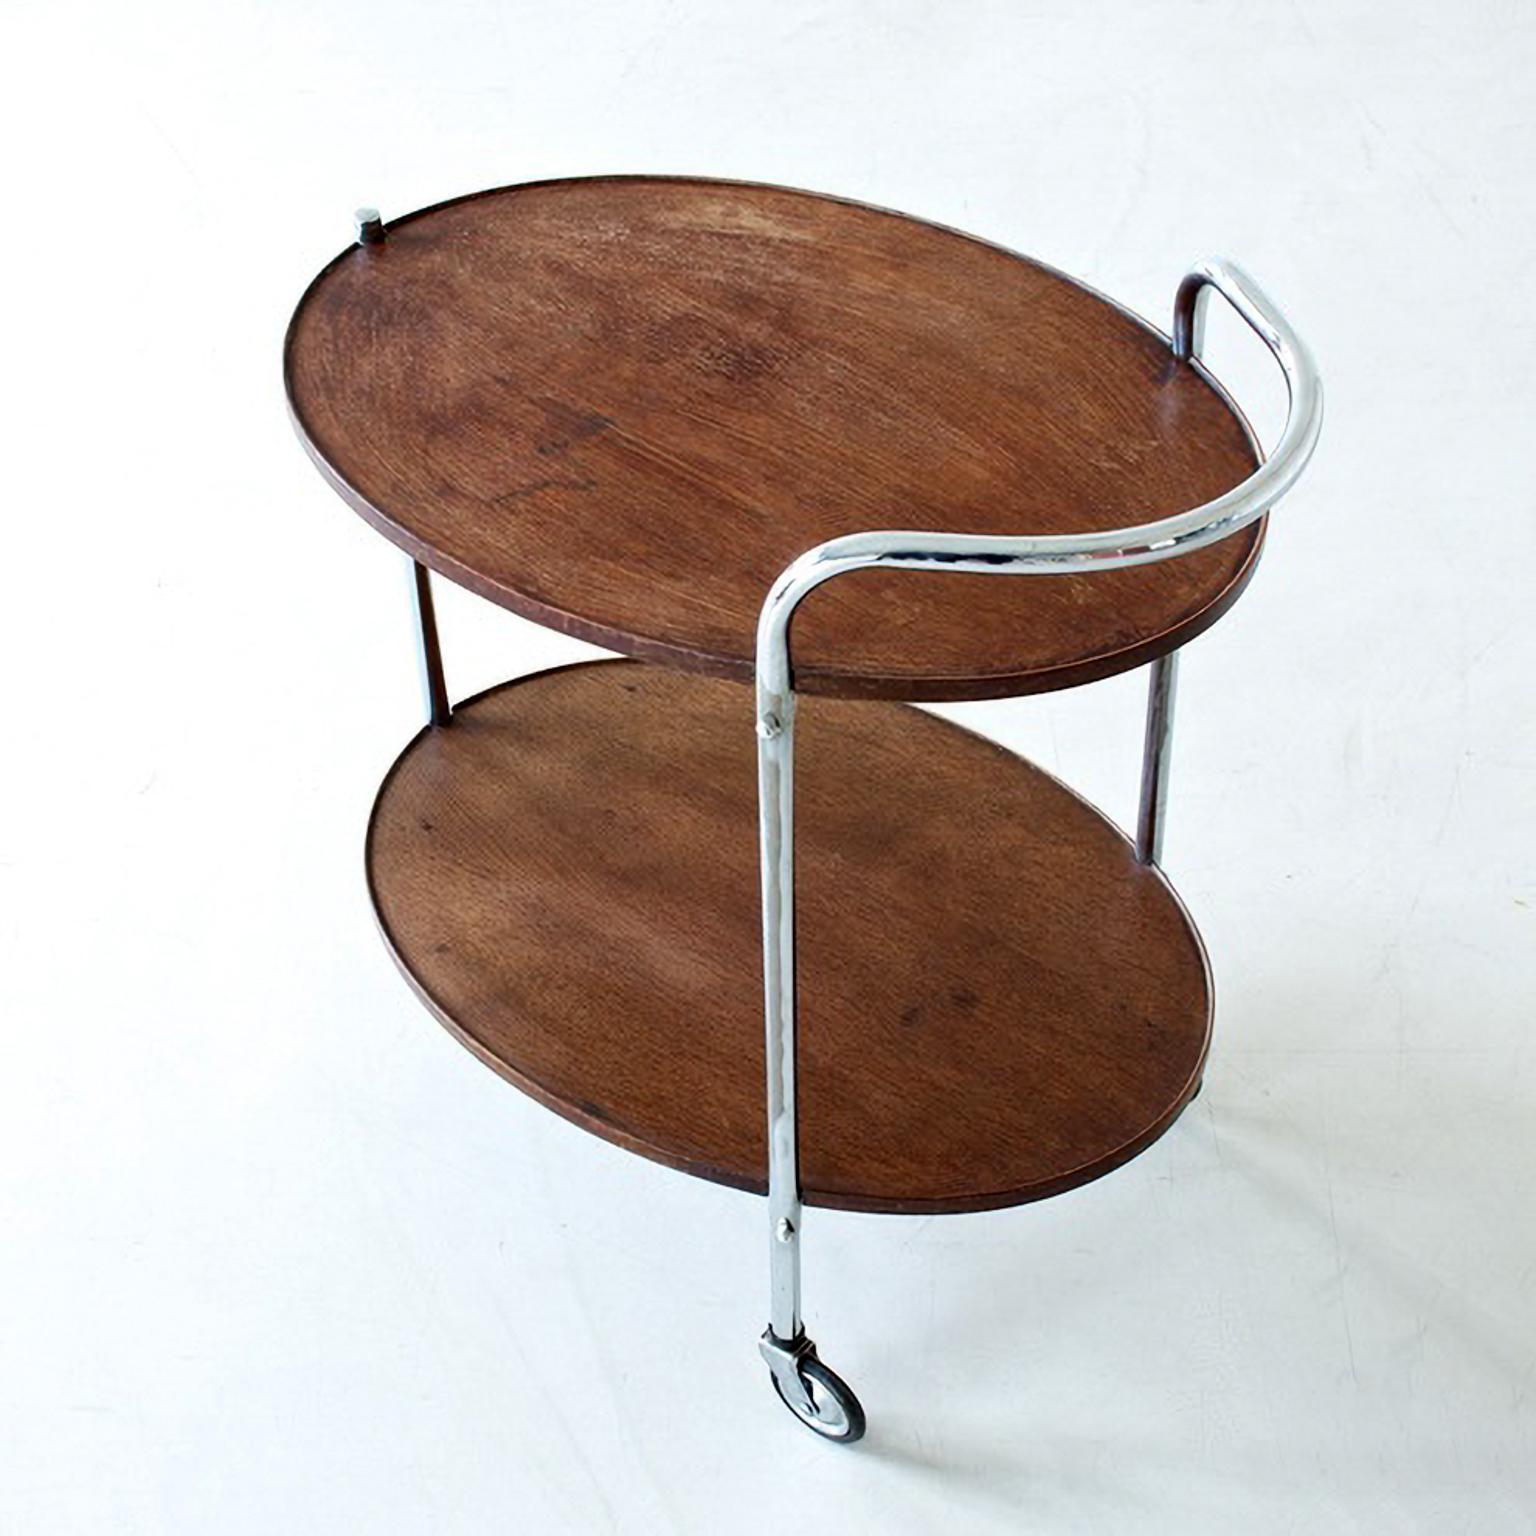 Stained Modernist Serving Trolley with Two Oval Wooden Shelves Chromed Metal, circa 1930 For Sale